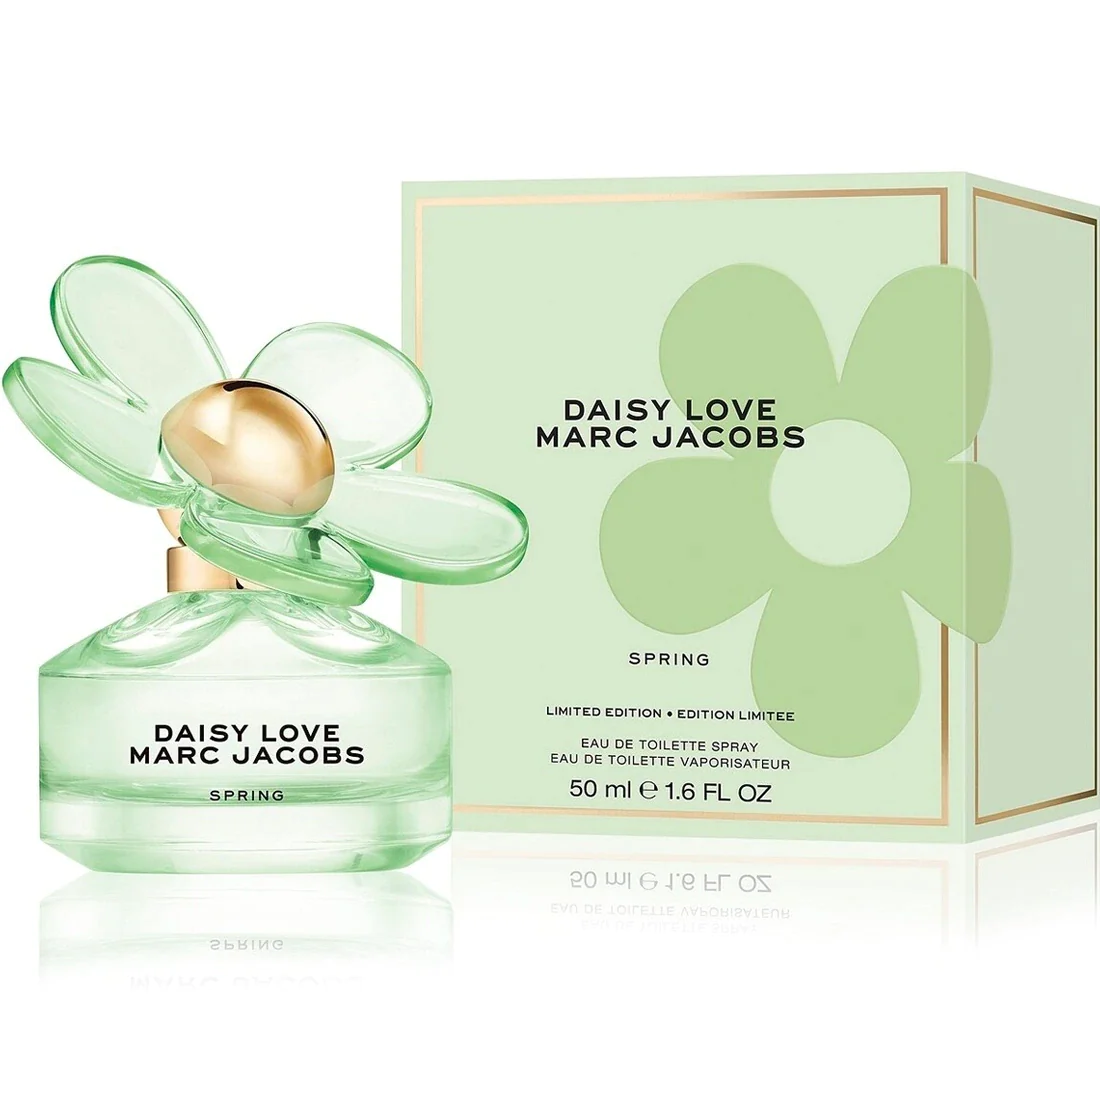 JACOBS LOVE DAISY Shop - Hustle 1.6OZ EDT WOMEN SPRING MARC with